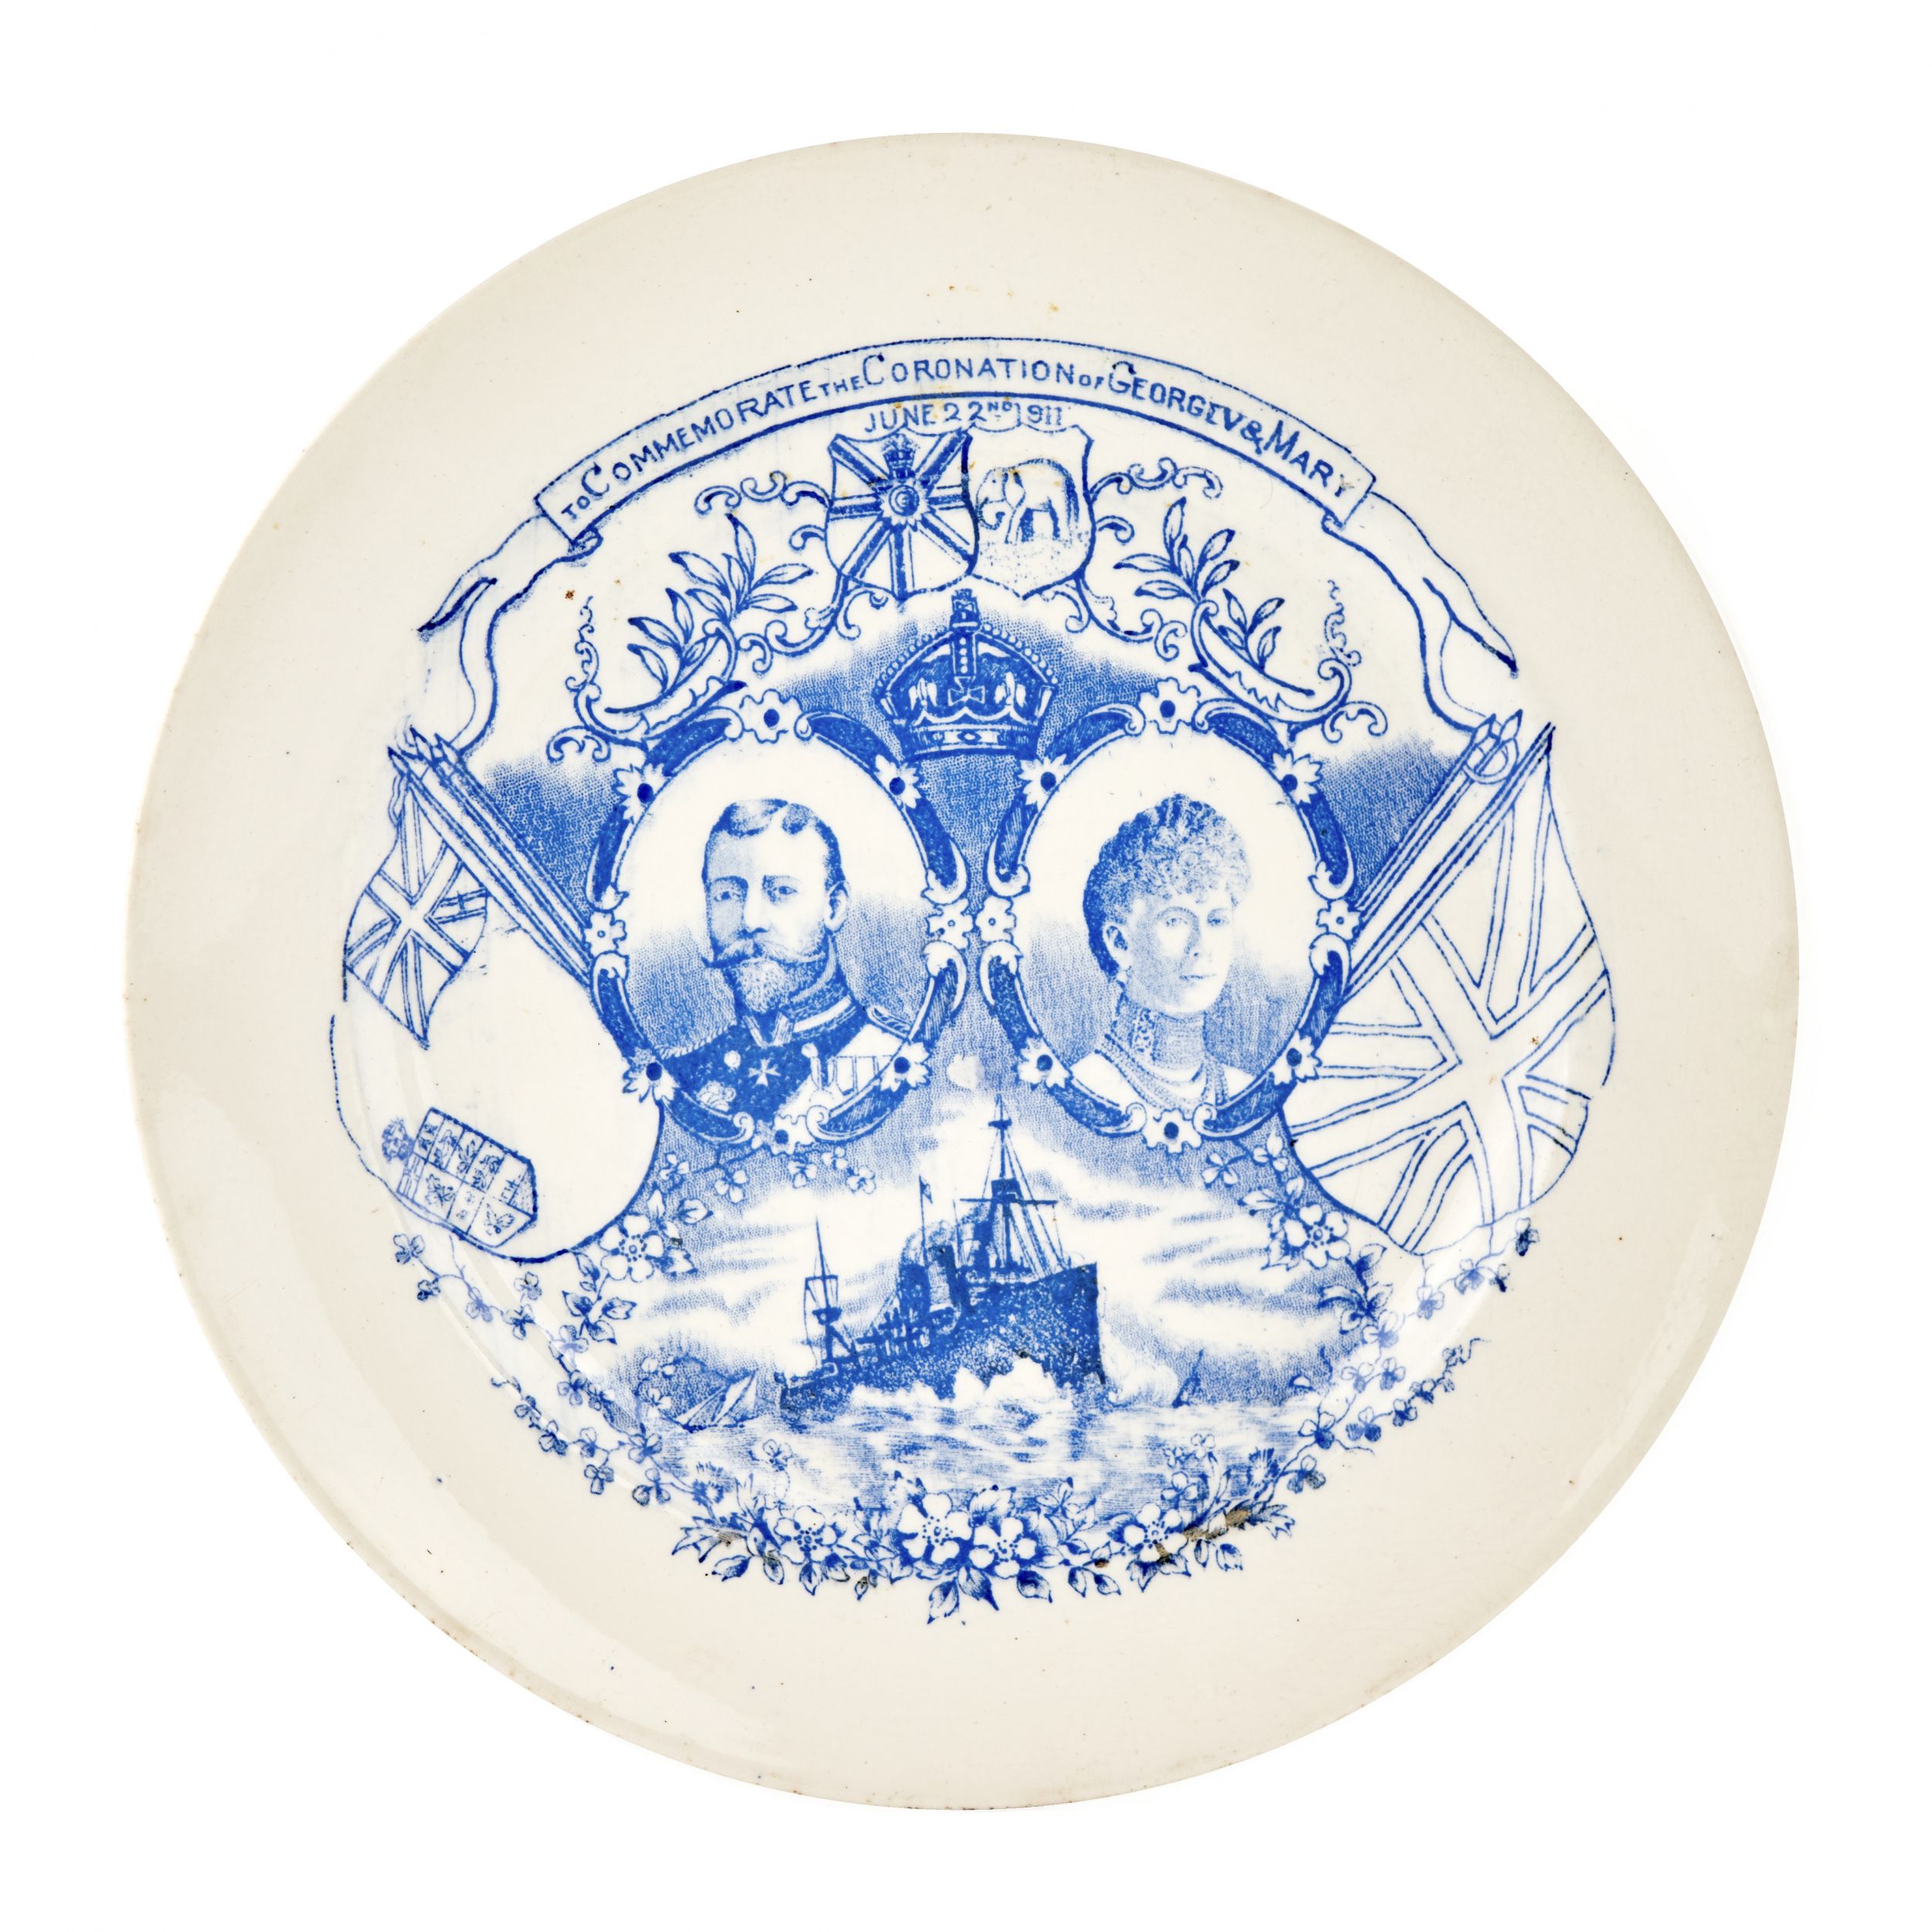 Early-20th-century-decorative-dish-commemorating-the-coronation-of-George-V-and-Mary